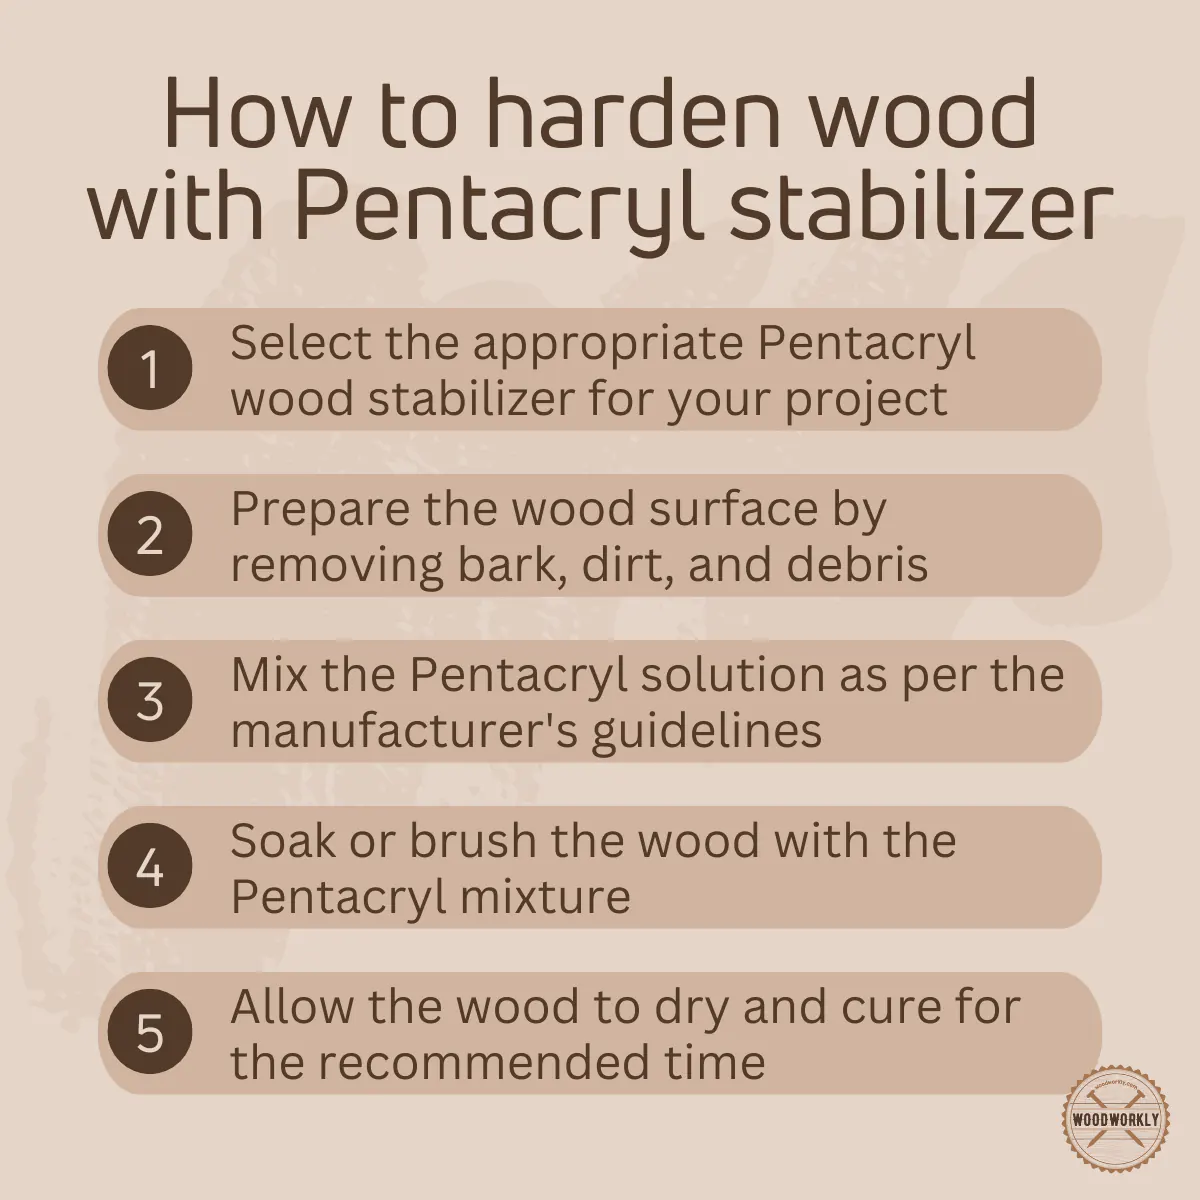 How to harden wood with Pentacryl stabilizer